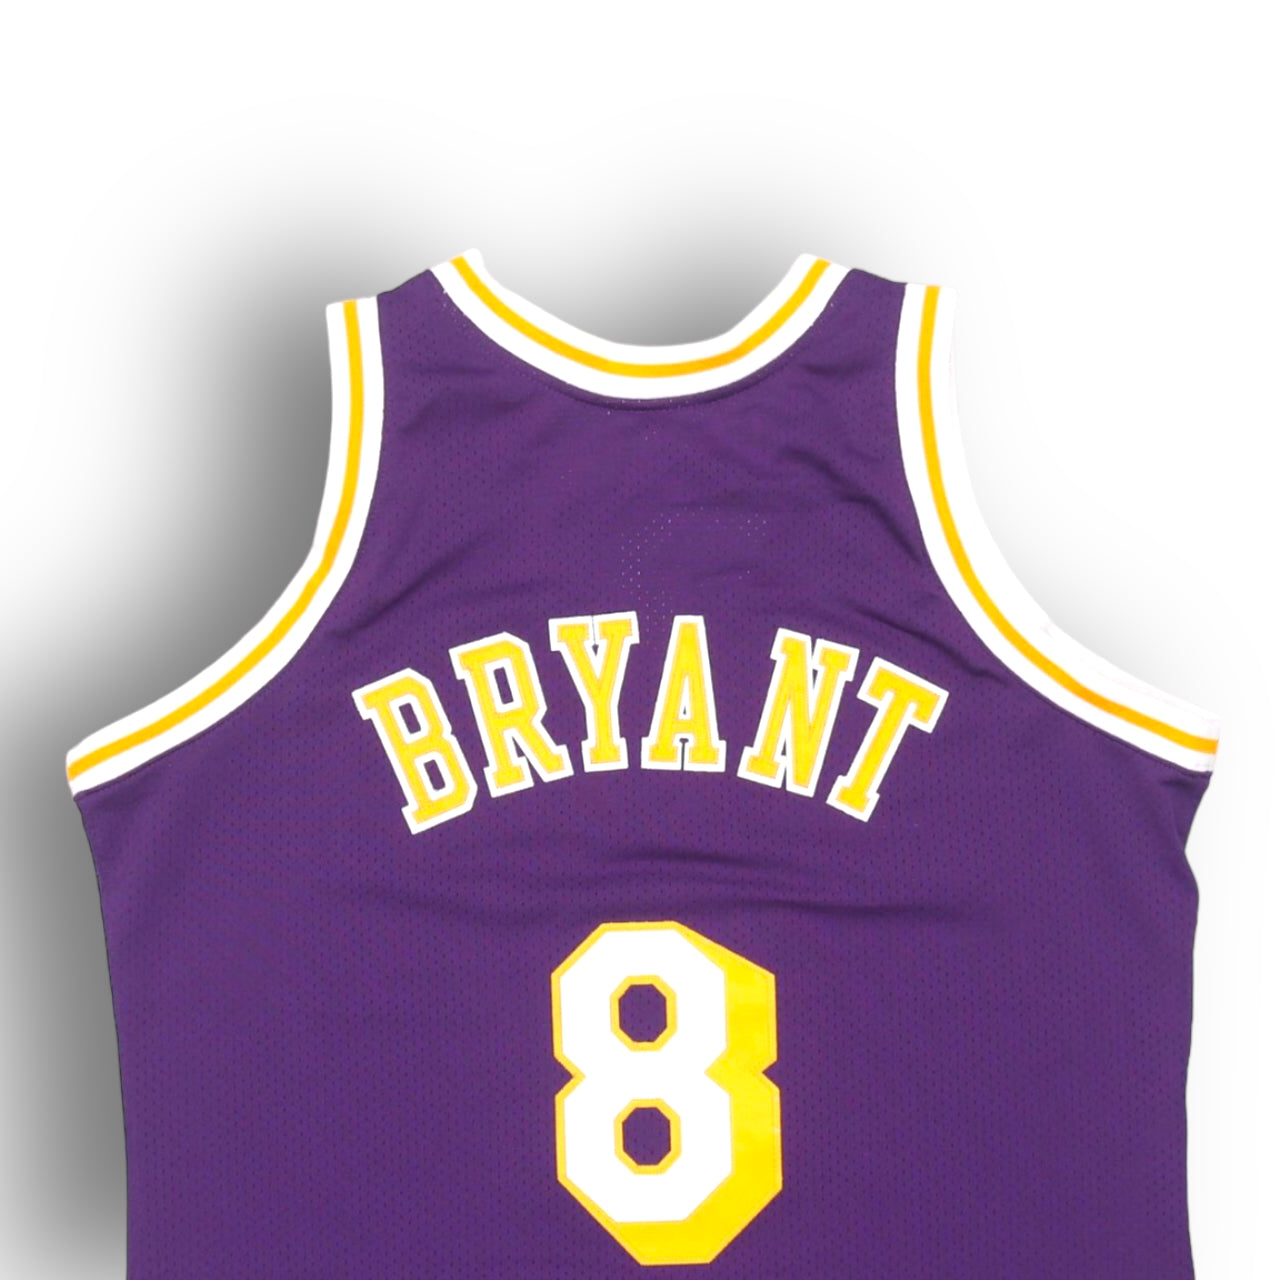 Mitchell and Ness Kobe Bryant Los Angeles Lakers 1996-1997 Rookie Season Away Authentic Jersey - Purple #8 - Hoop Jersey Store